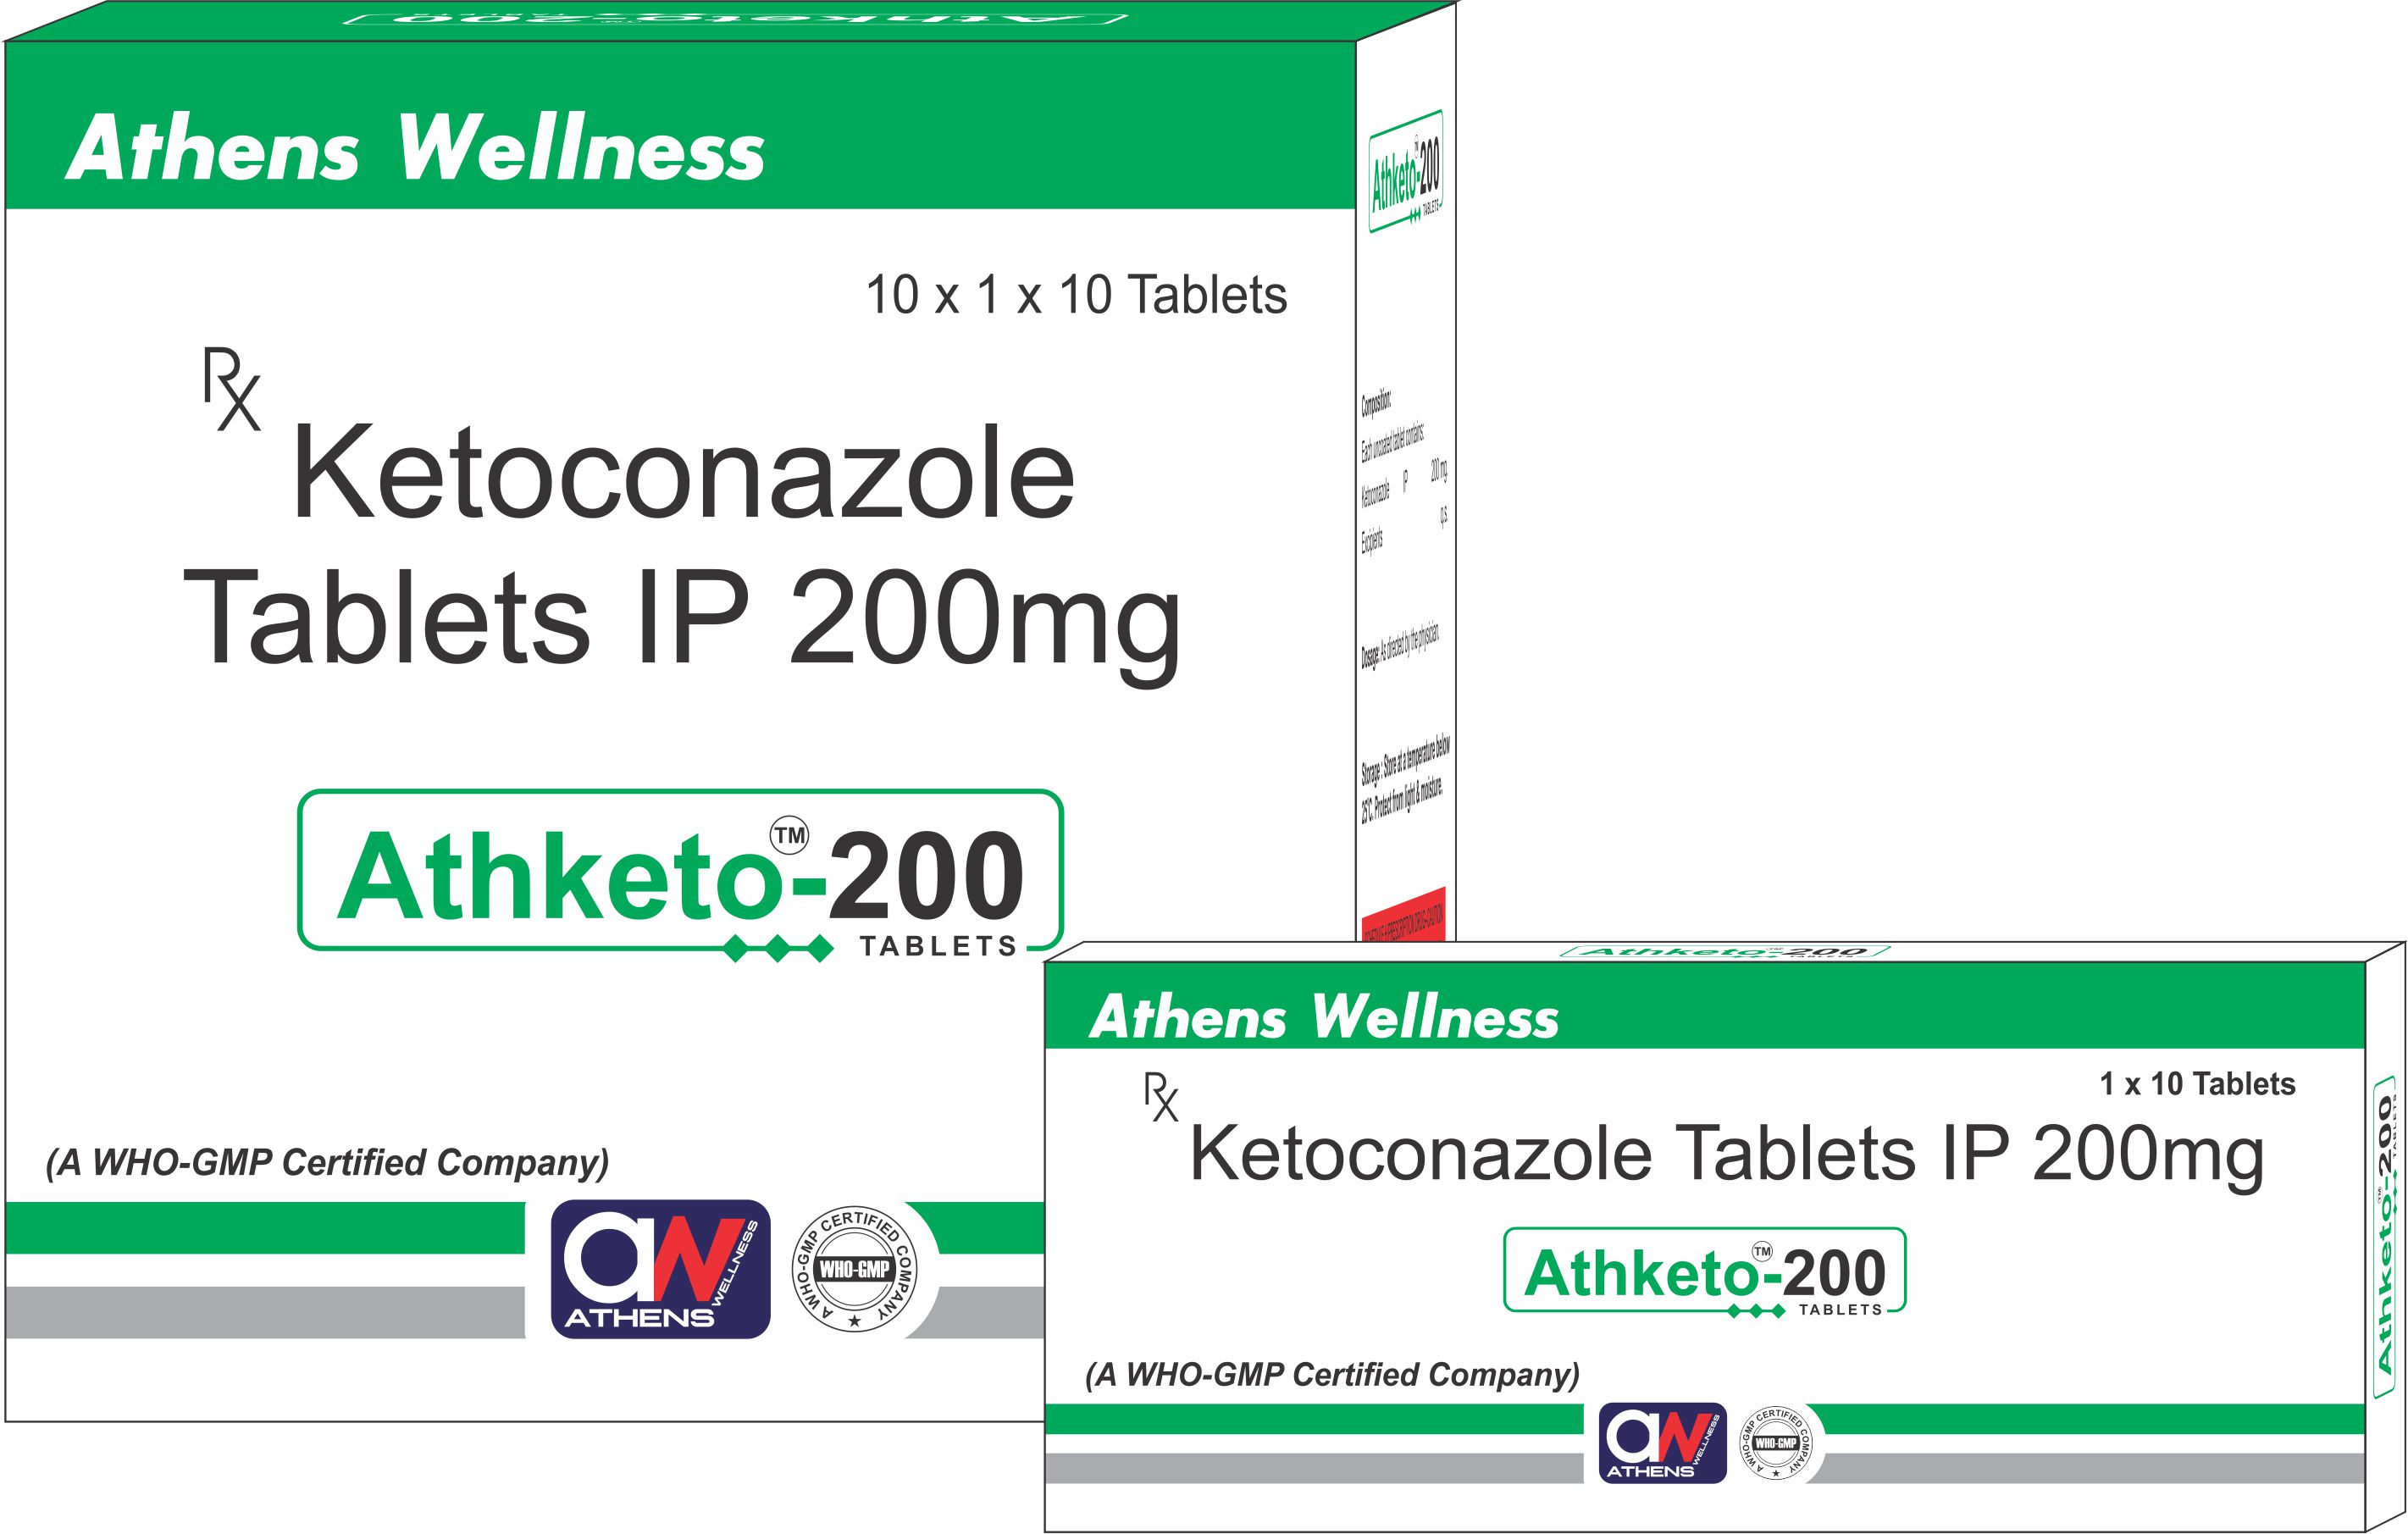 ATHKETO-200 TABLETS